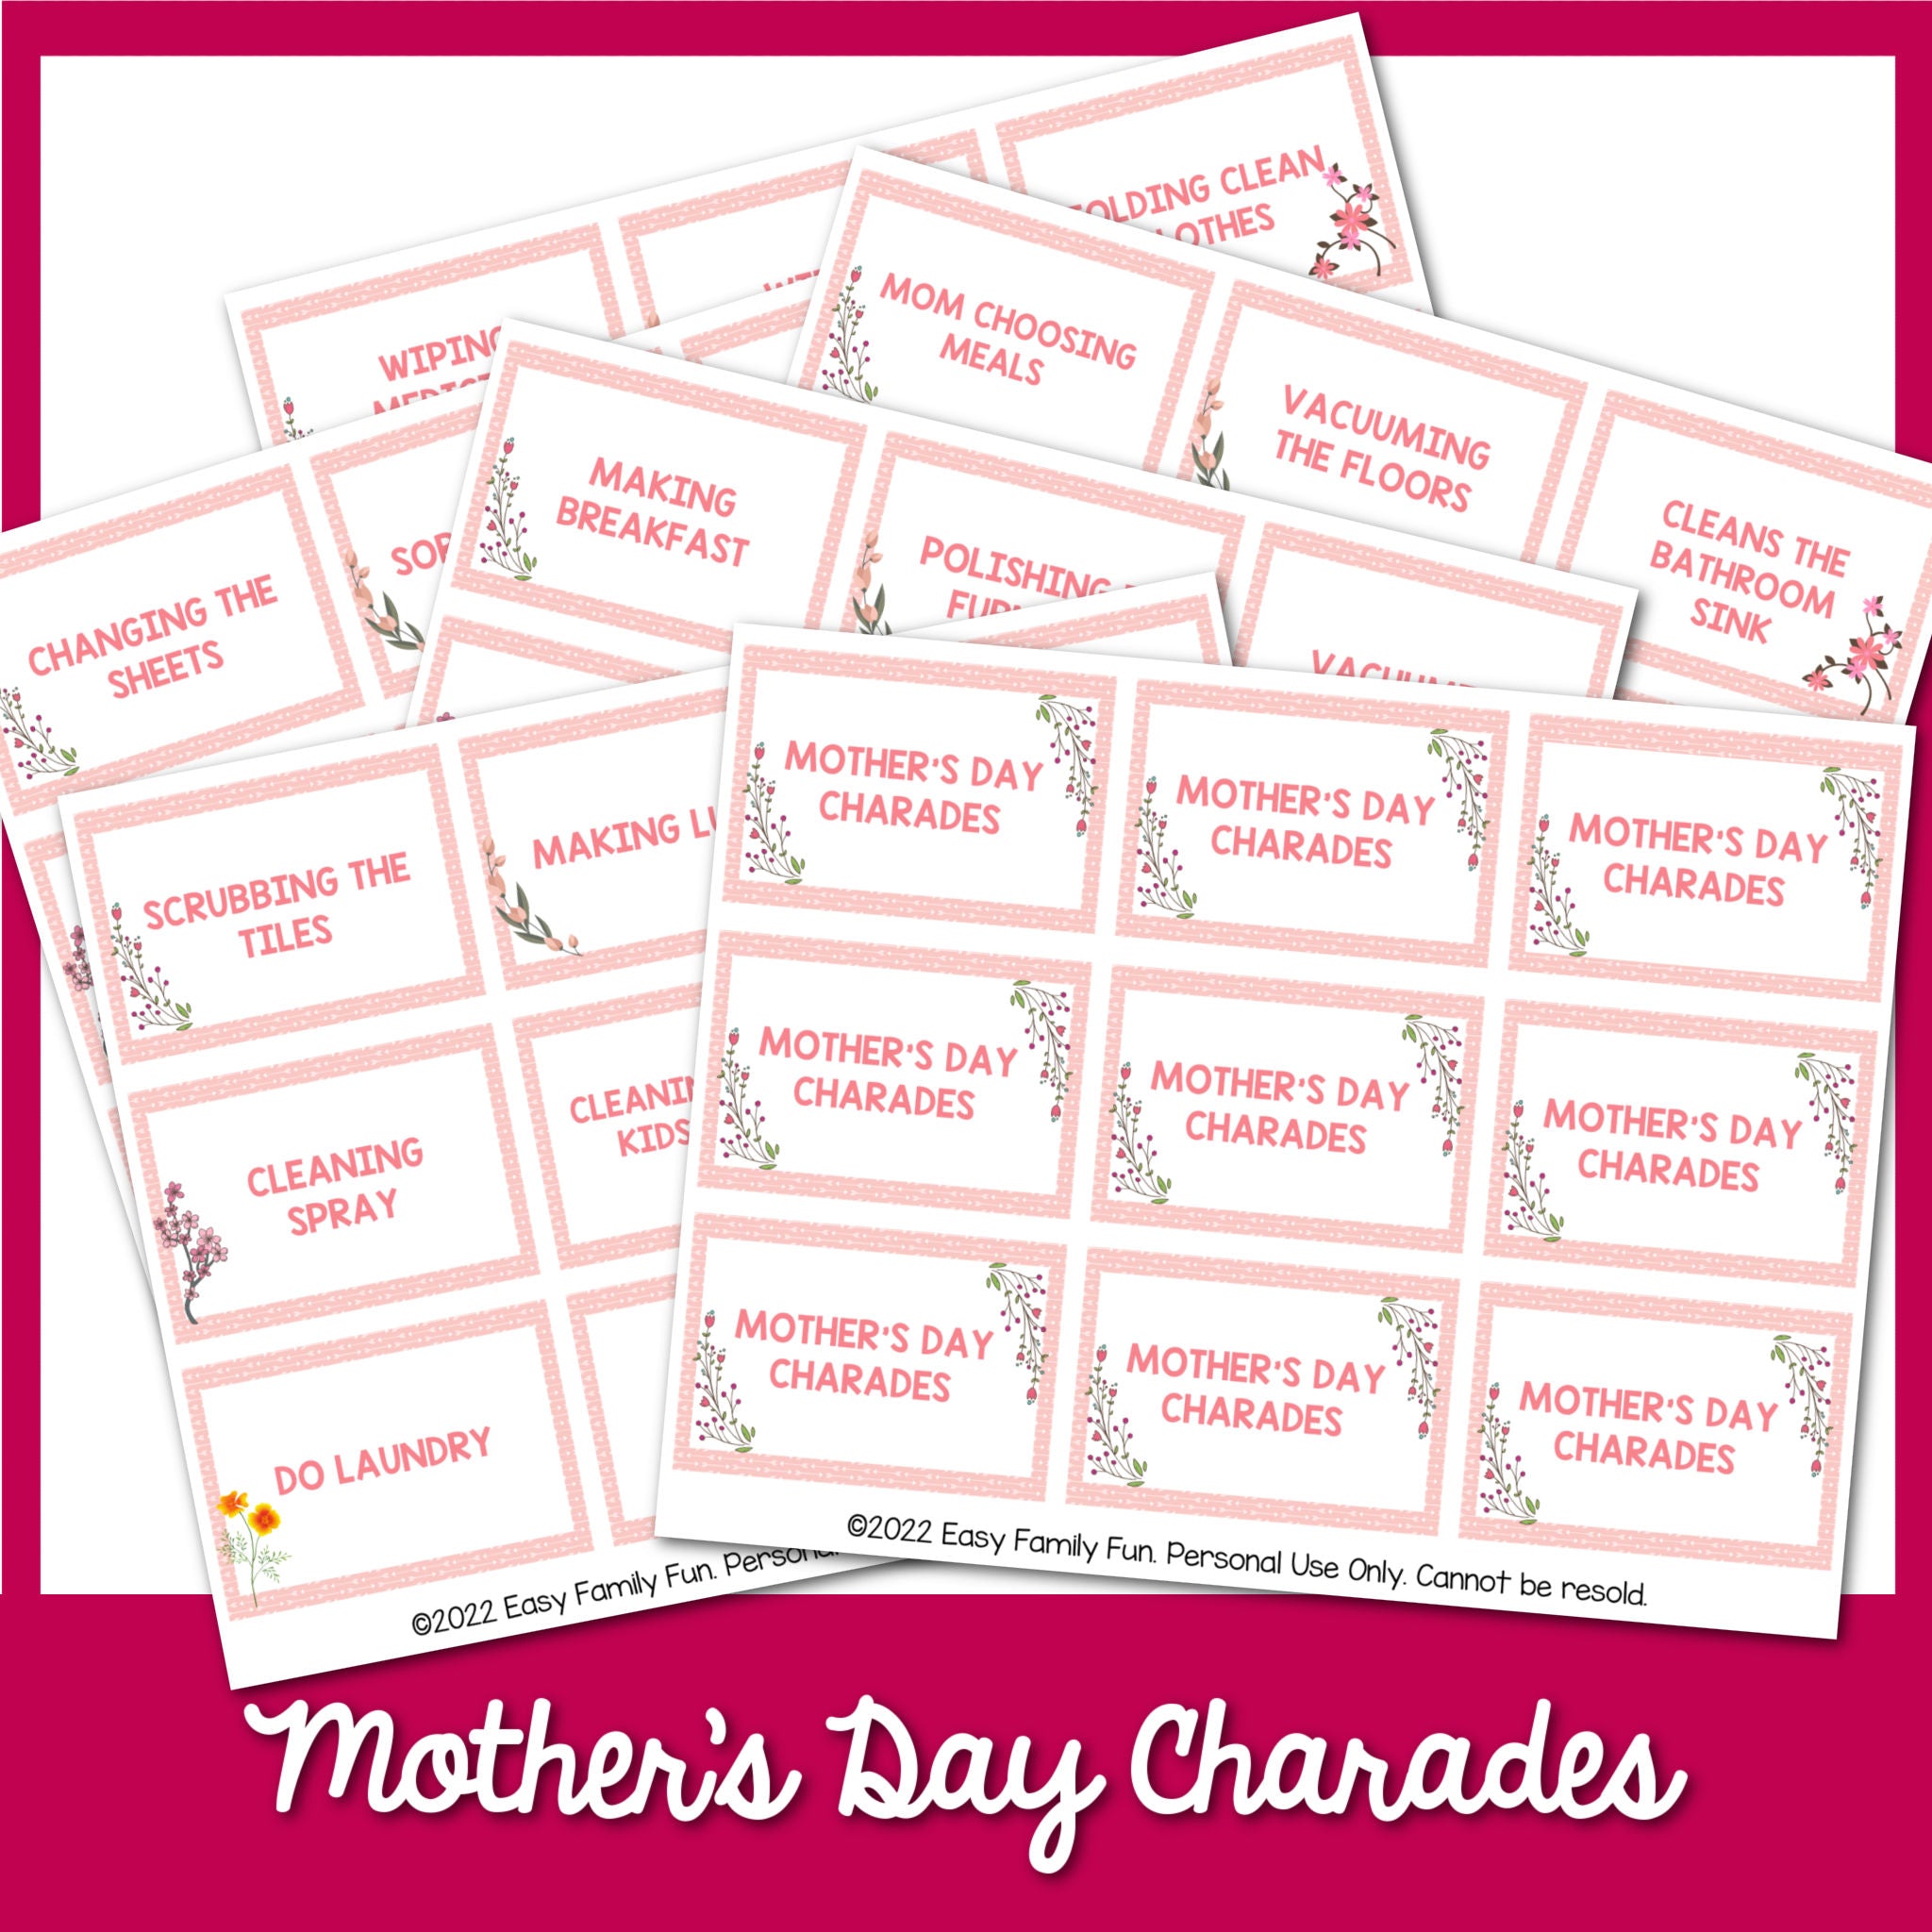 Mother's Day Charades